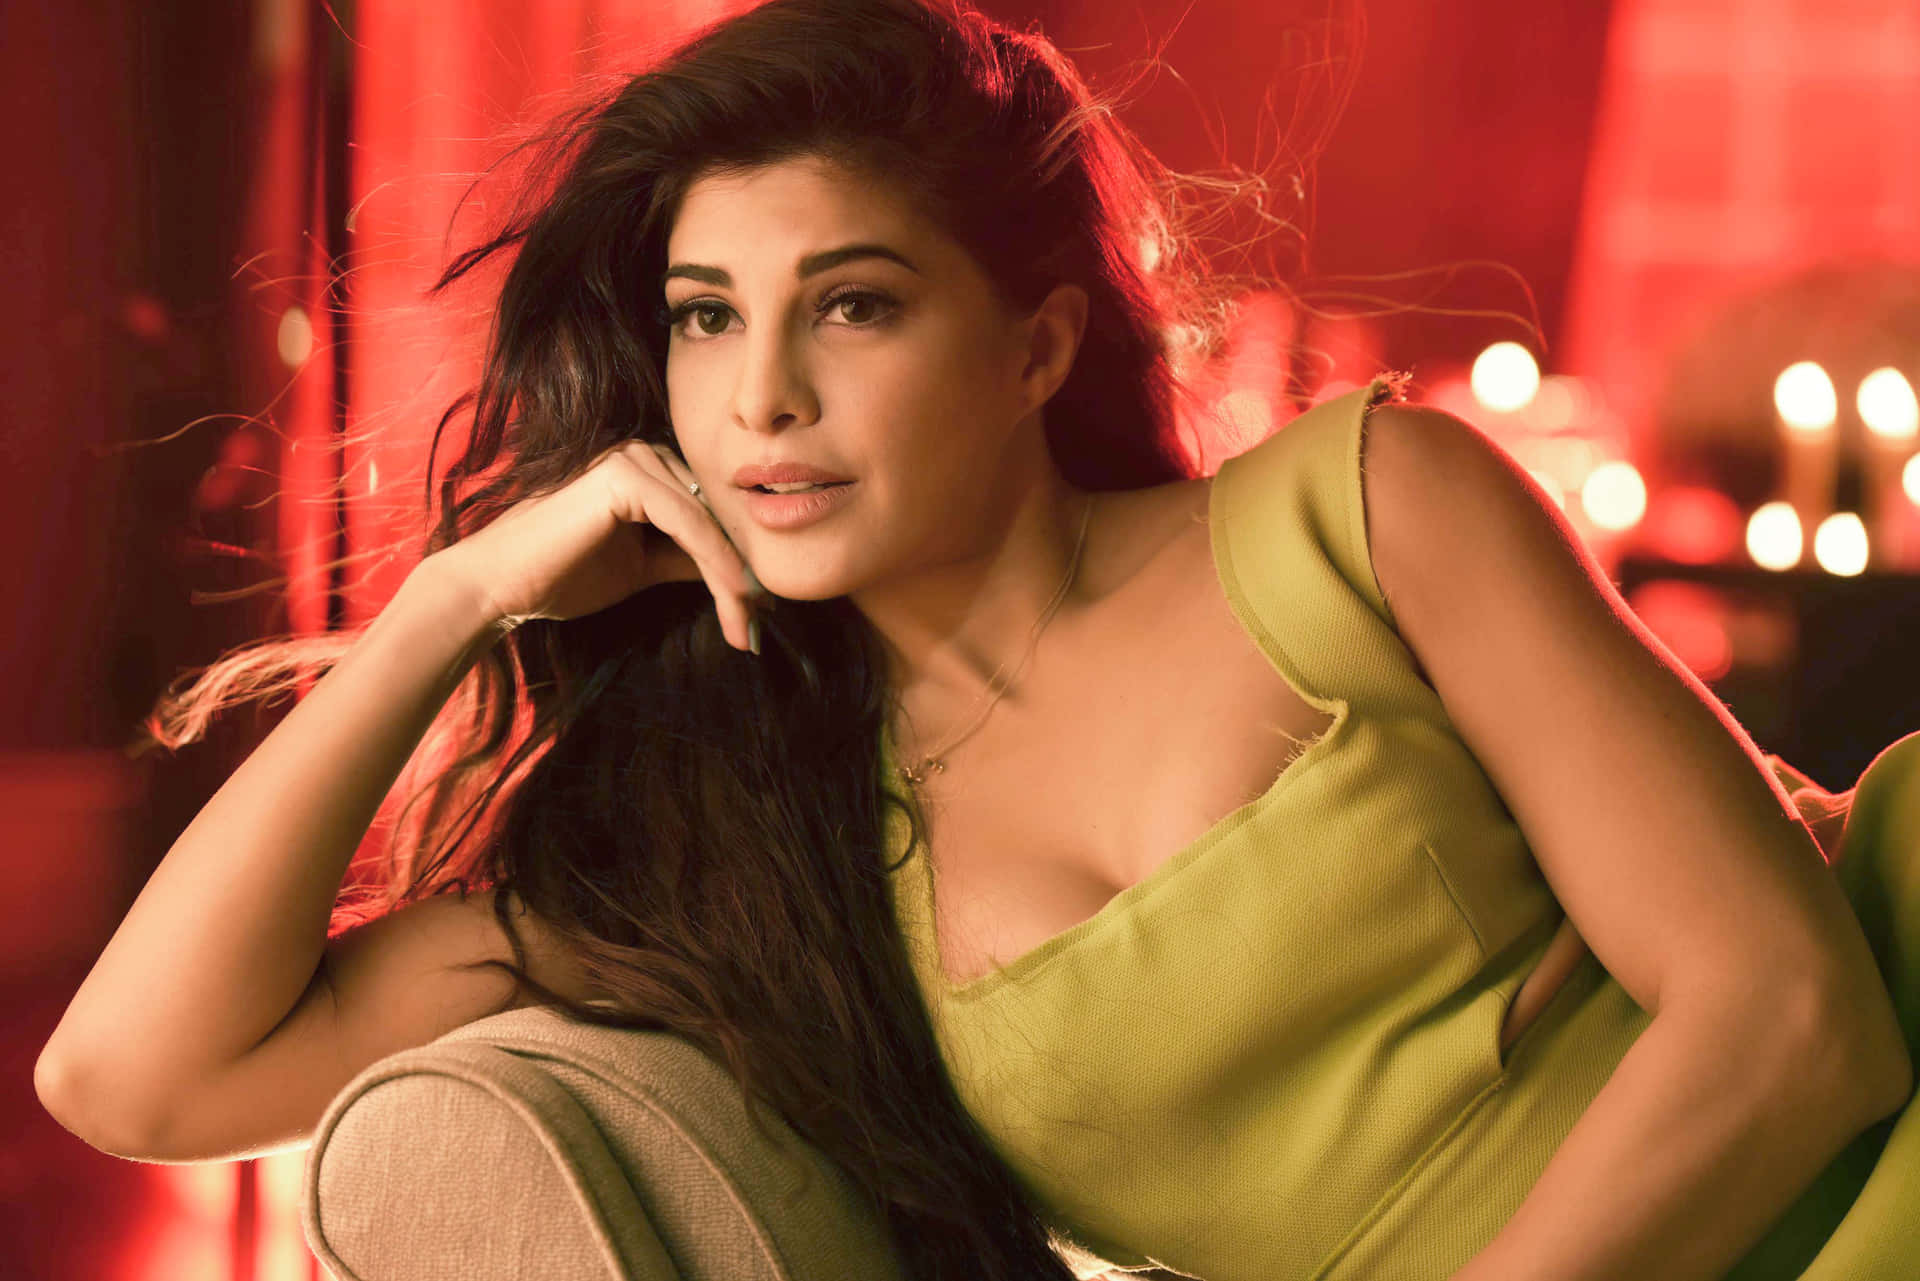 Jacqueline Fernandez, Bollywood actress and model